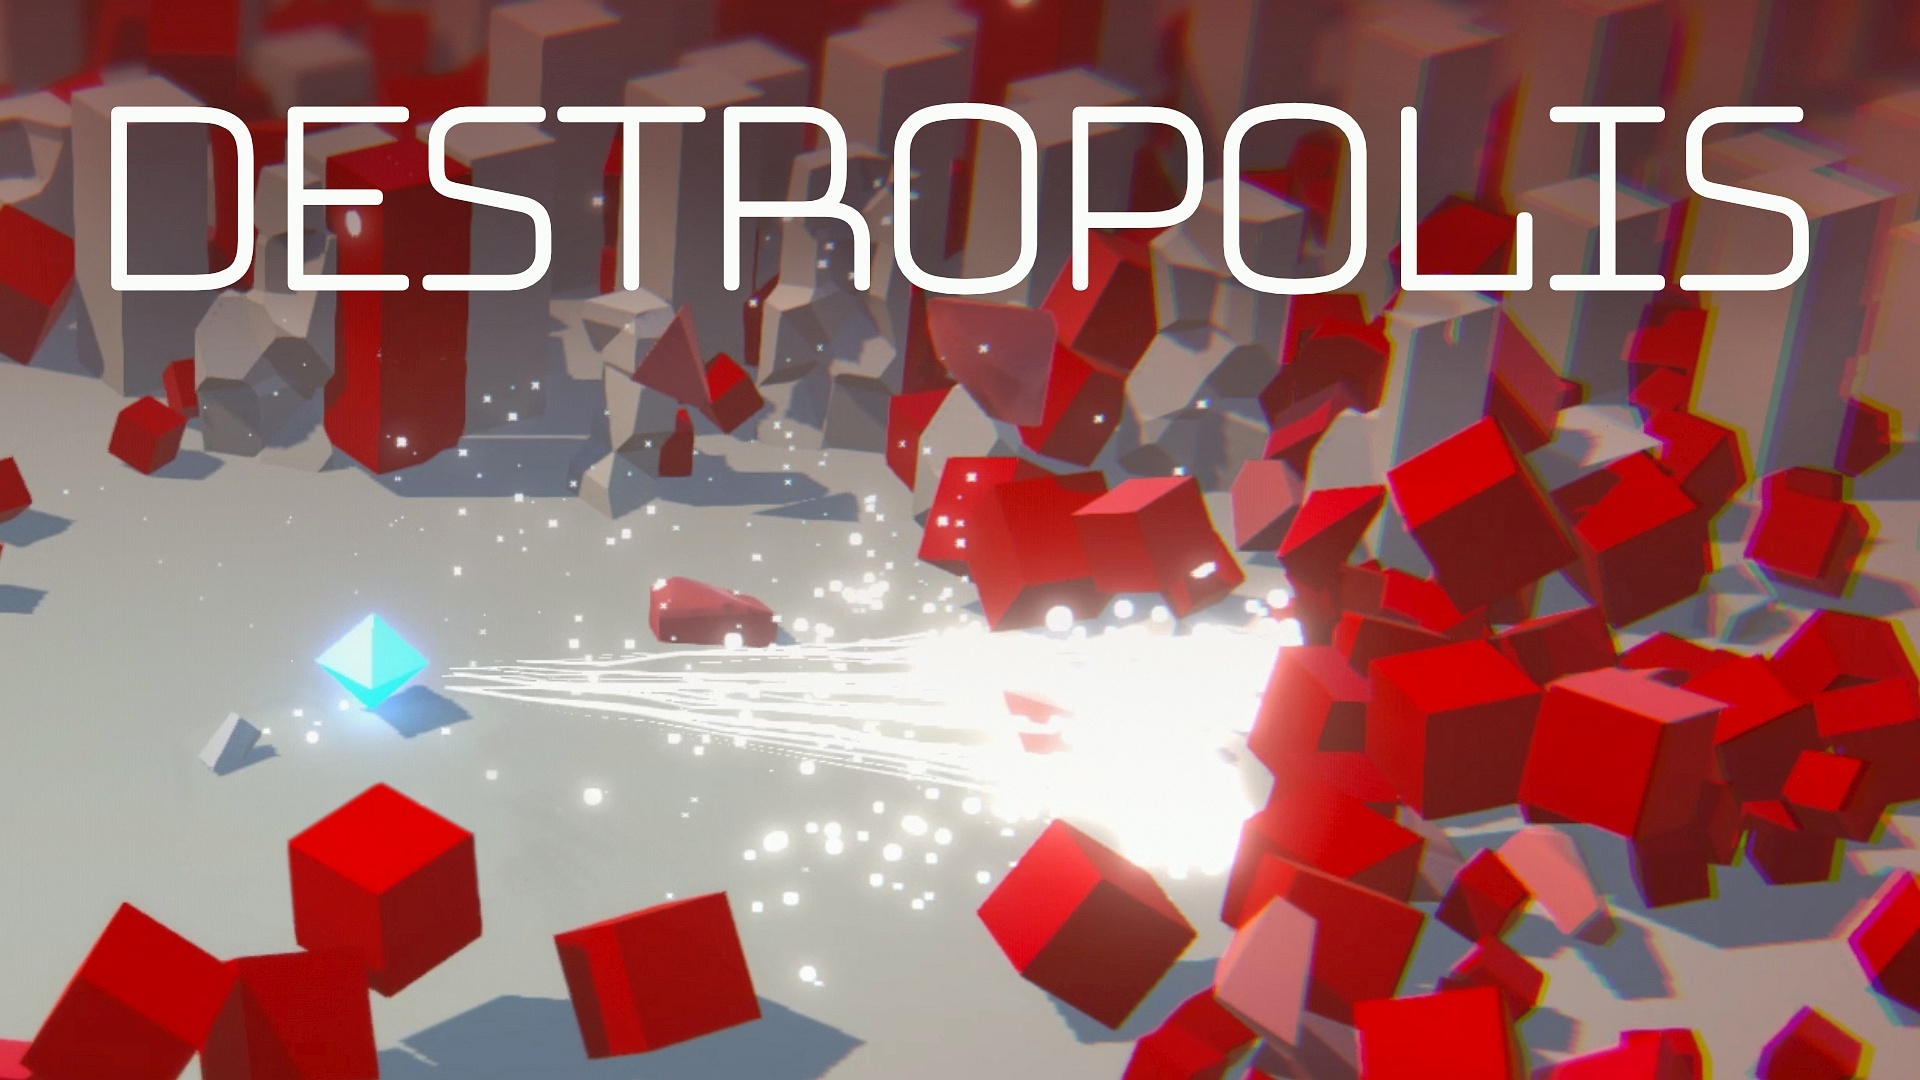 Destropolis is out now on the Nintendo Switch!